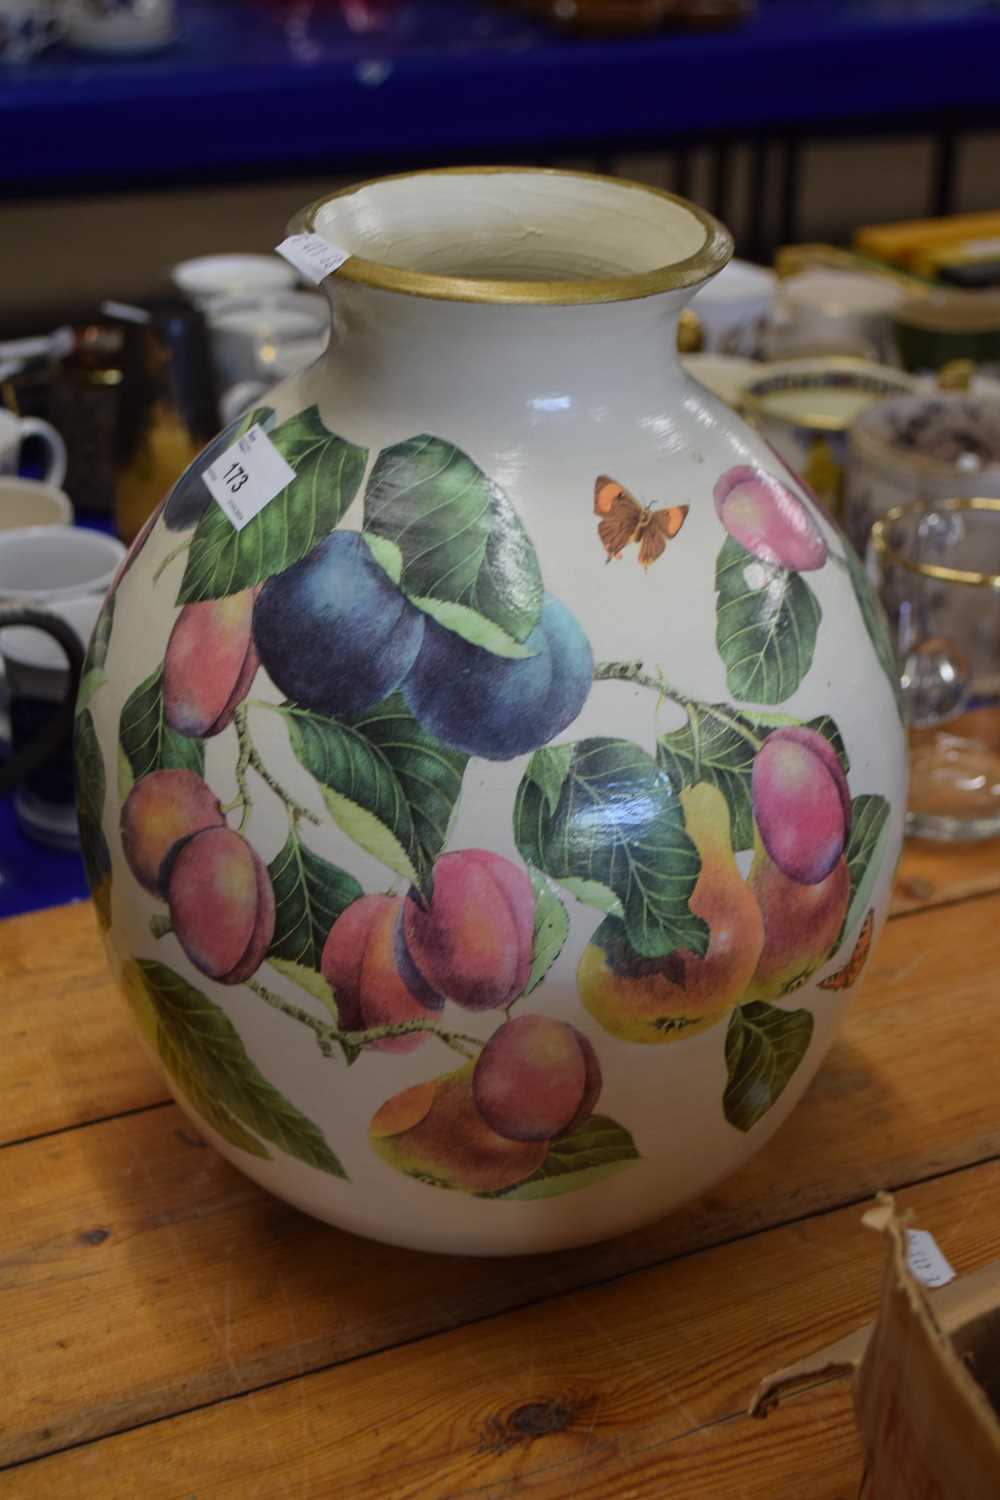 A large pottery vase of baluster shape decorated with fruit and butterflies